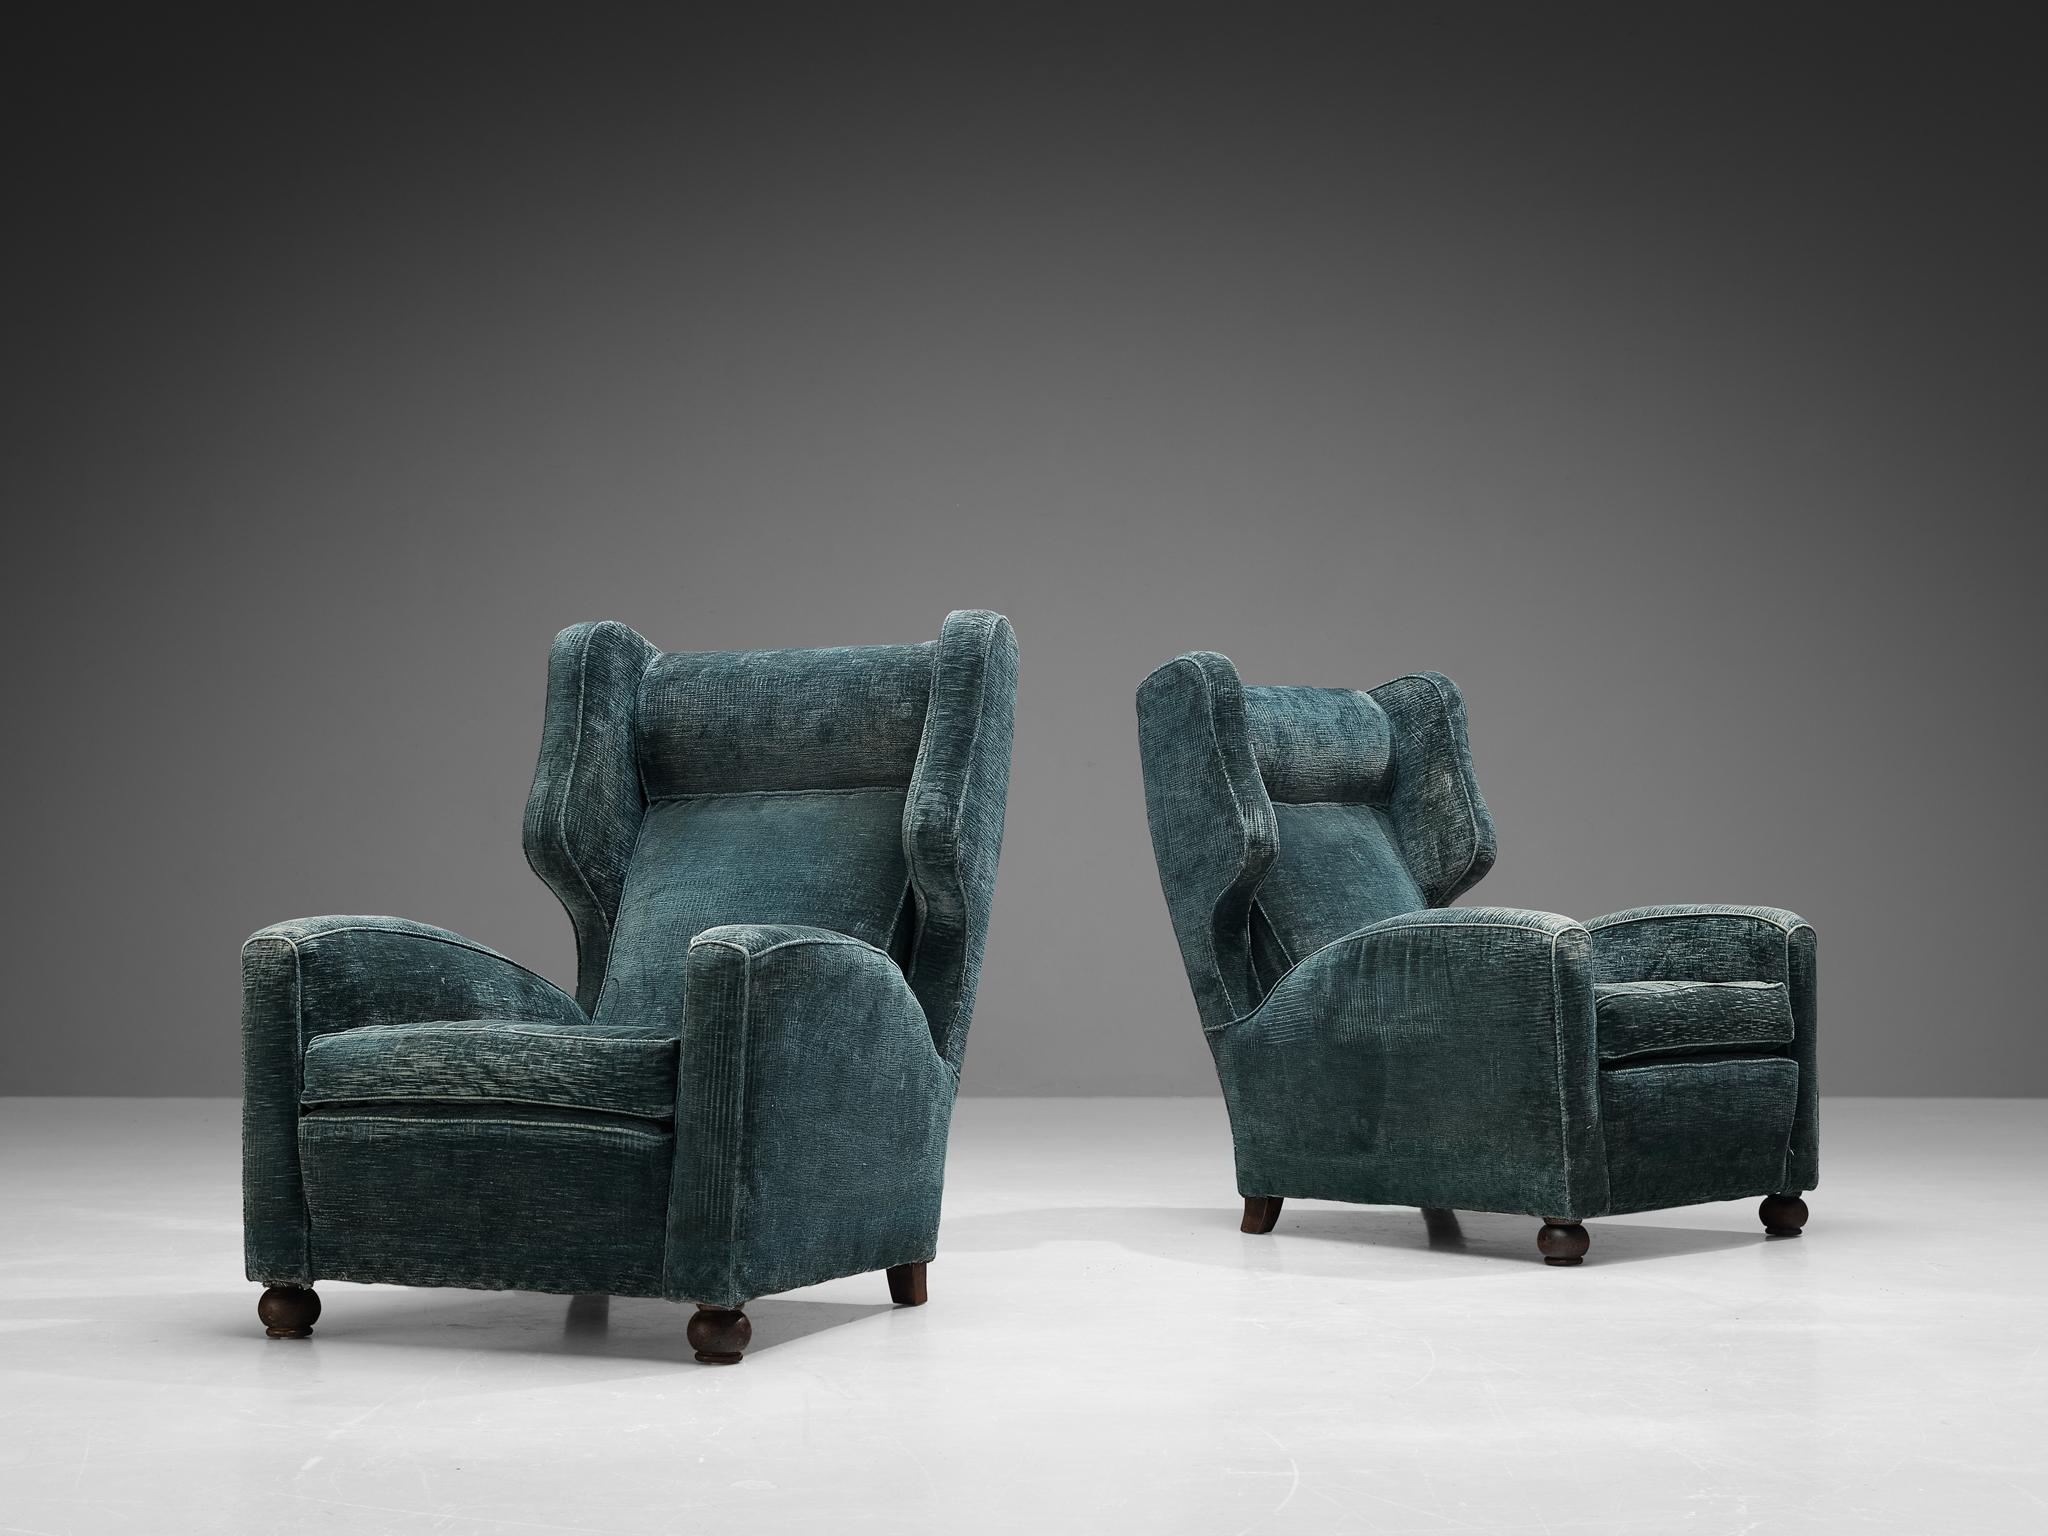 Pair of lounge chairs, velvet, wood, Italy, late 1940s.

These Italian Postwar wingback chairs have an unusually high back and gracious ears. The armrests feature pronounced curves that give the utmost comfort for the sitter. The color of the